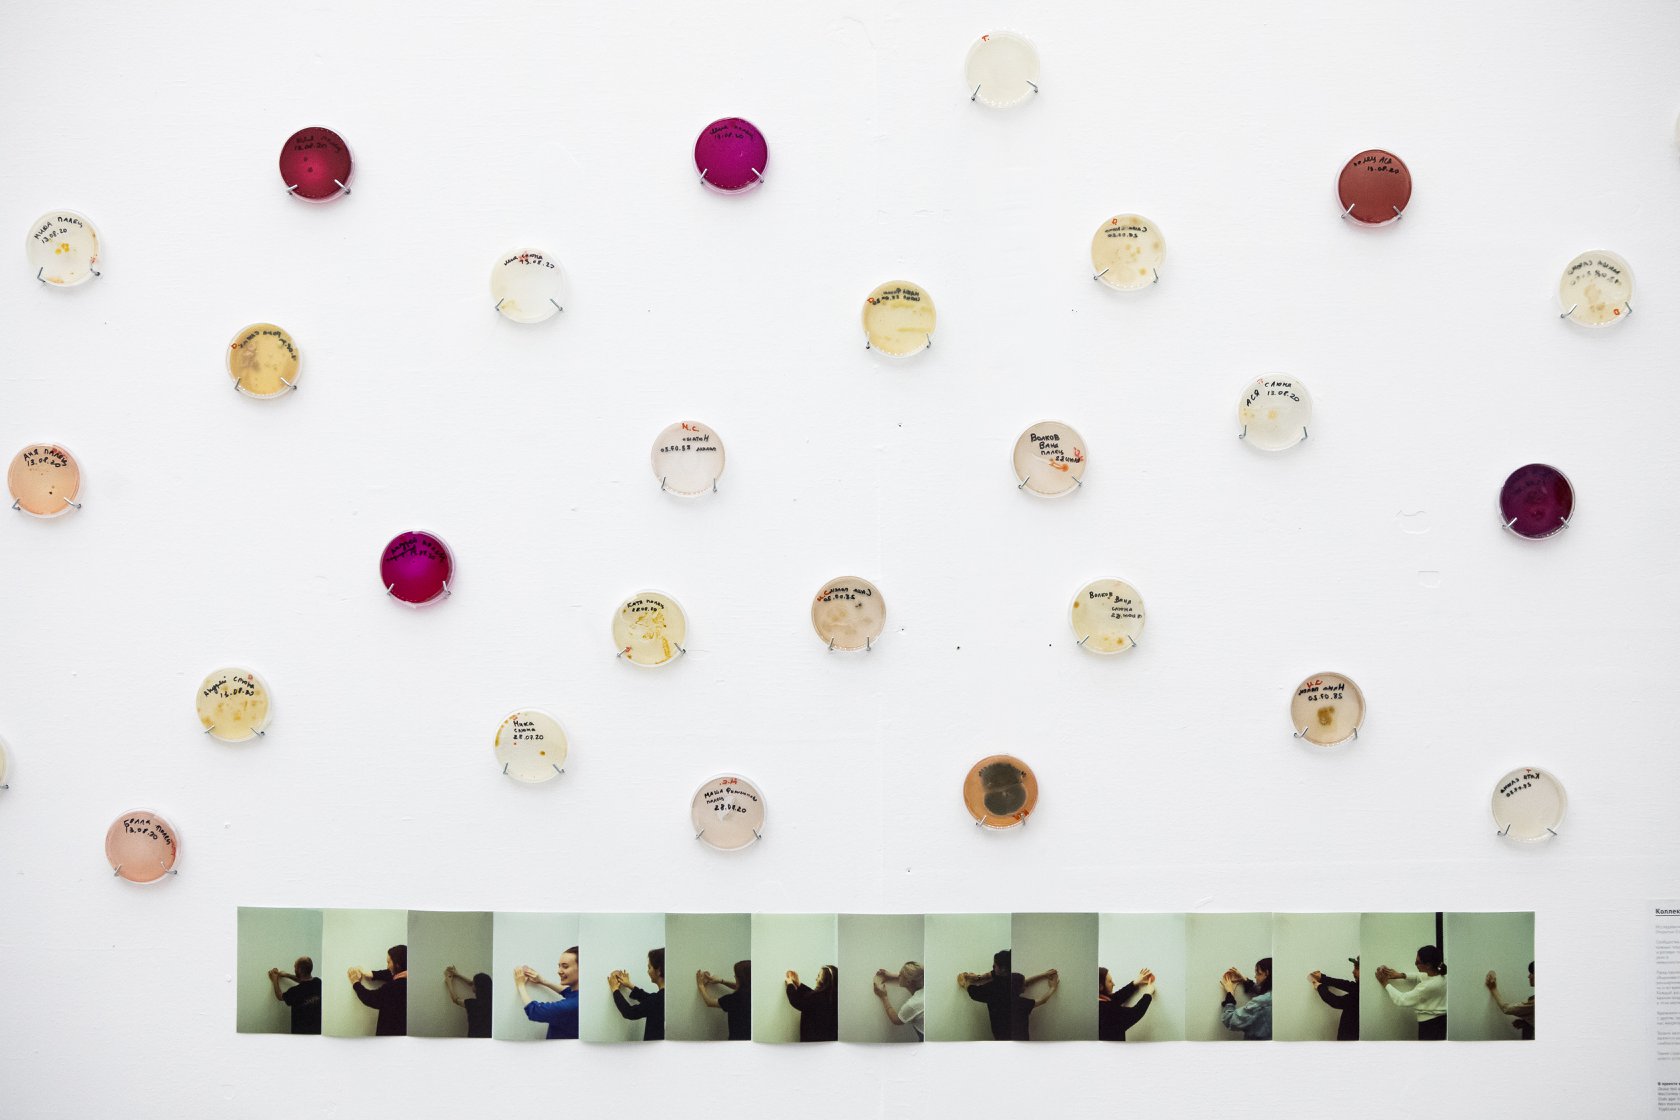 Collective Body, 2020. A pseudomedical research, this project explores the blurred boundaries between the bodies through the microbiota of the artist’s colleagues from the Open Studios project